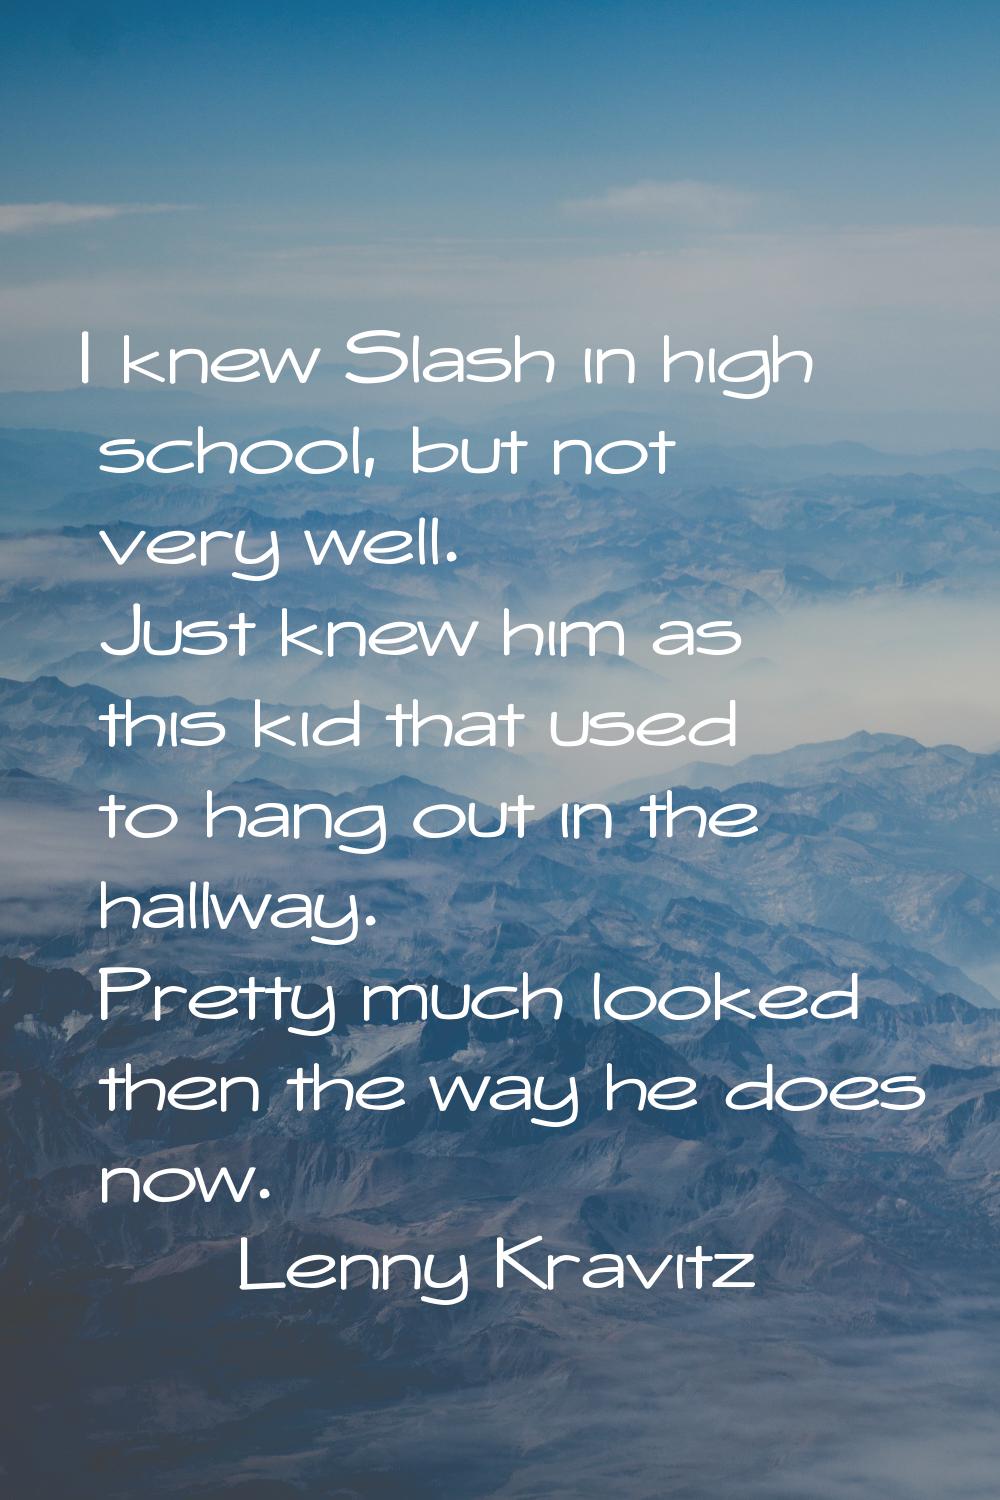 I knew Slash in high school, but not very well. Just knew him as this kid that used to hang out in 